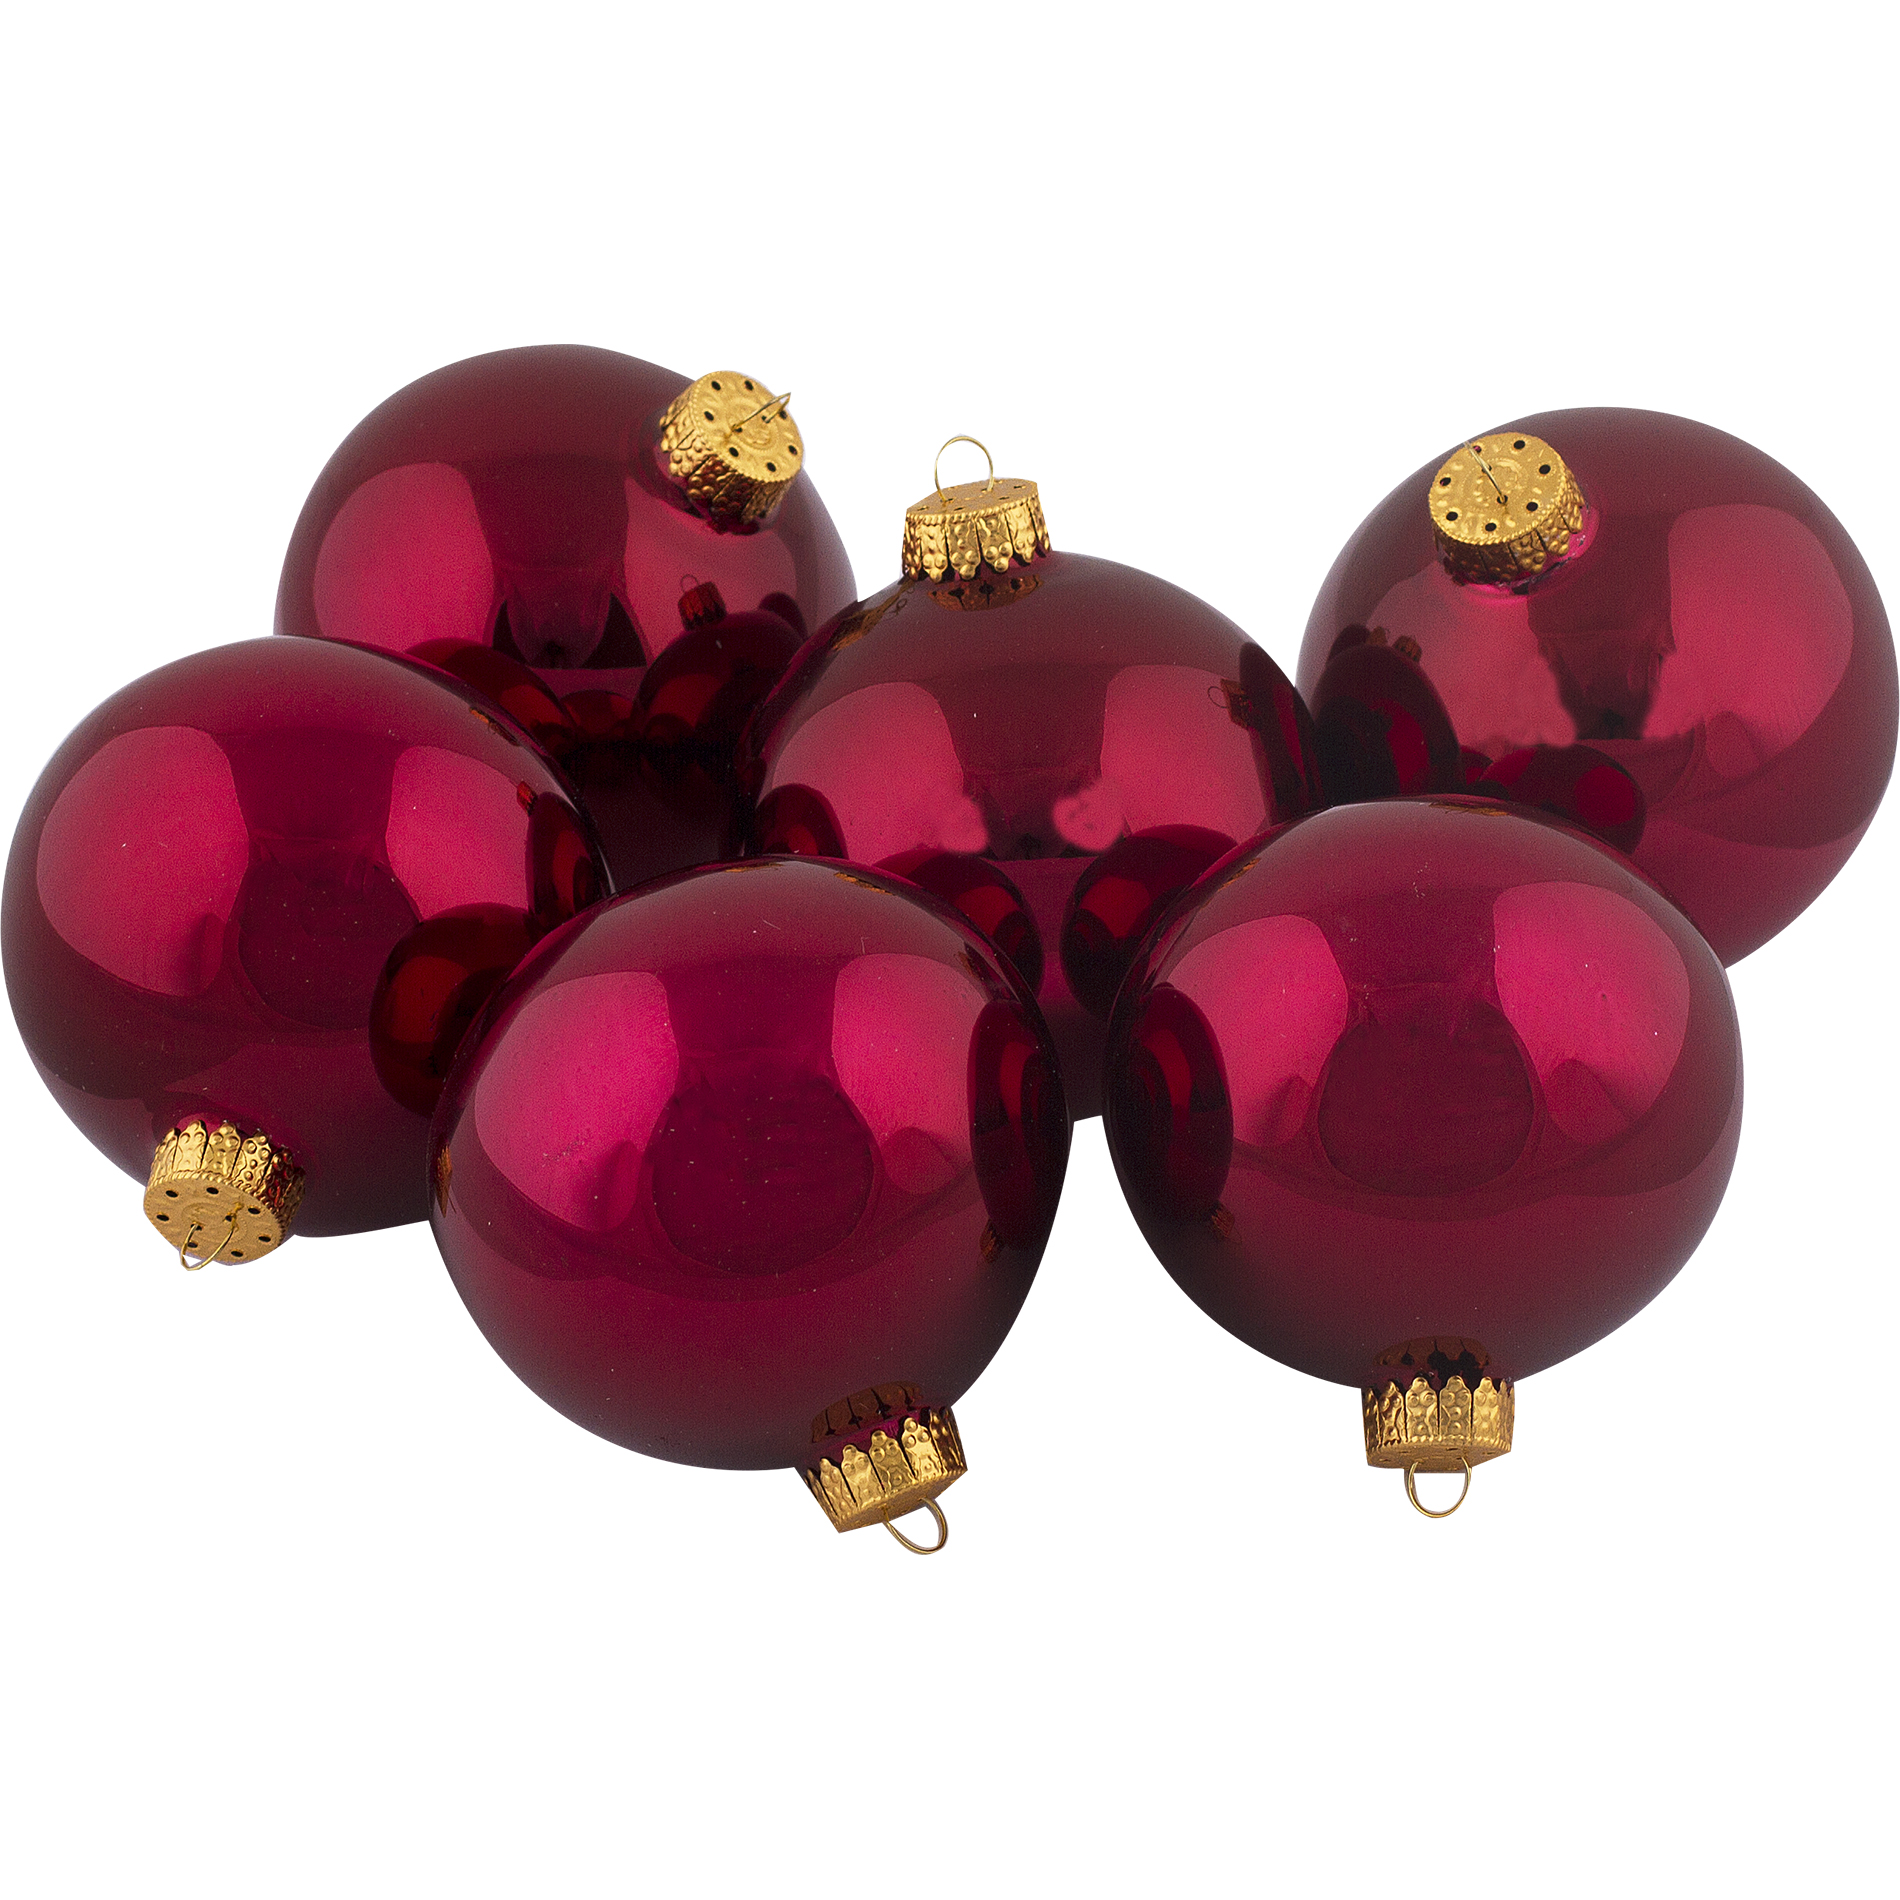 Donner & Blitzen Incorporated Burgundy Shiny Glass Christmas Ornaments, 85 mm, 6 Ct